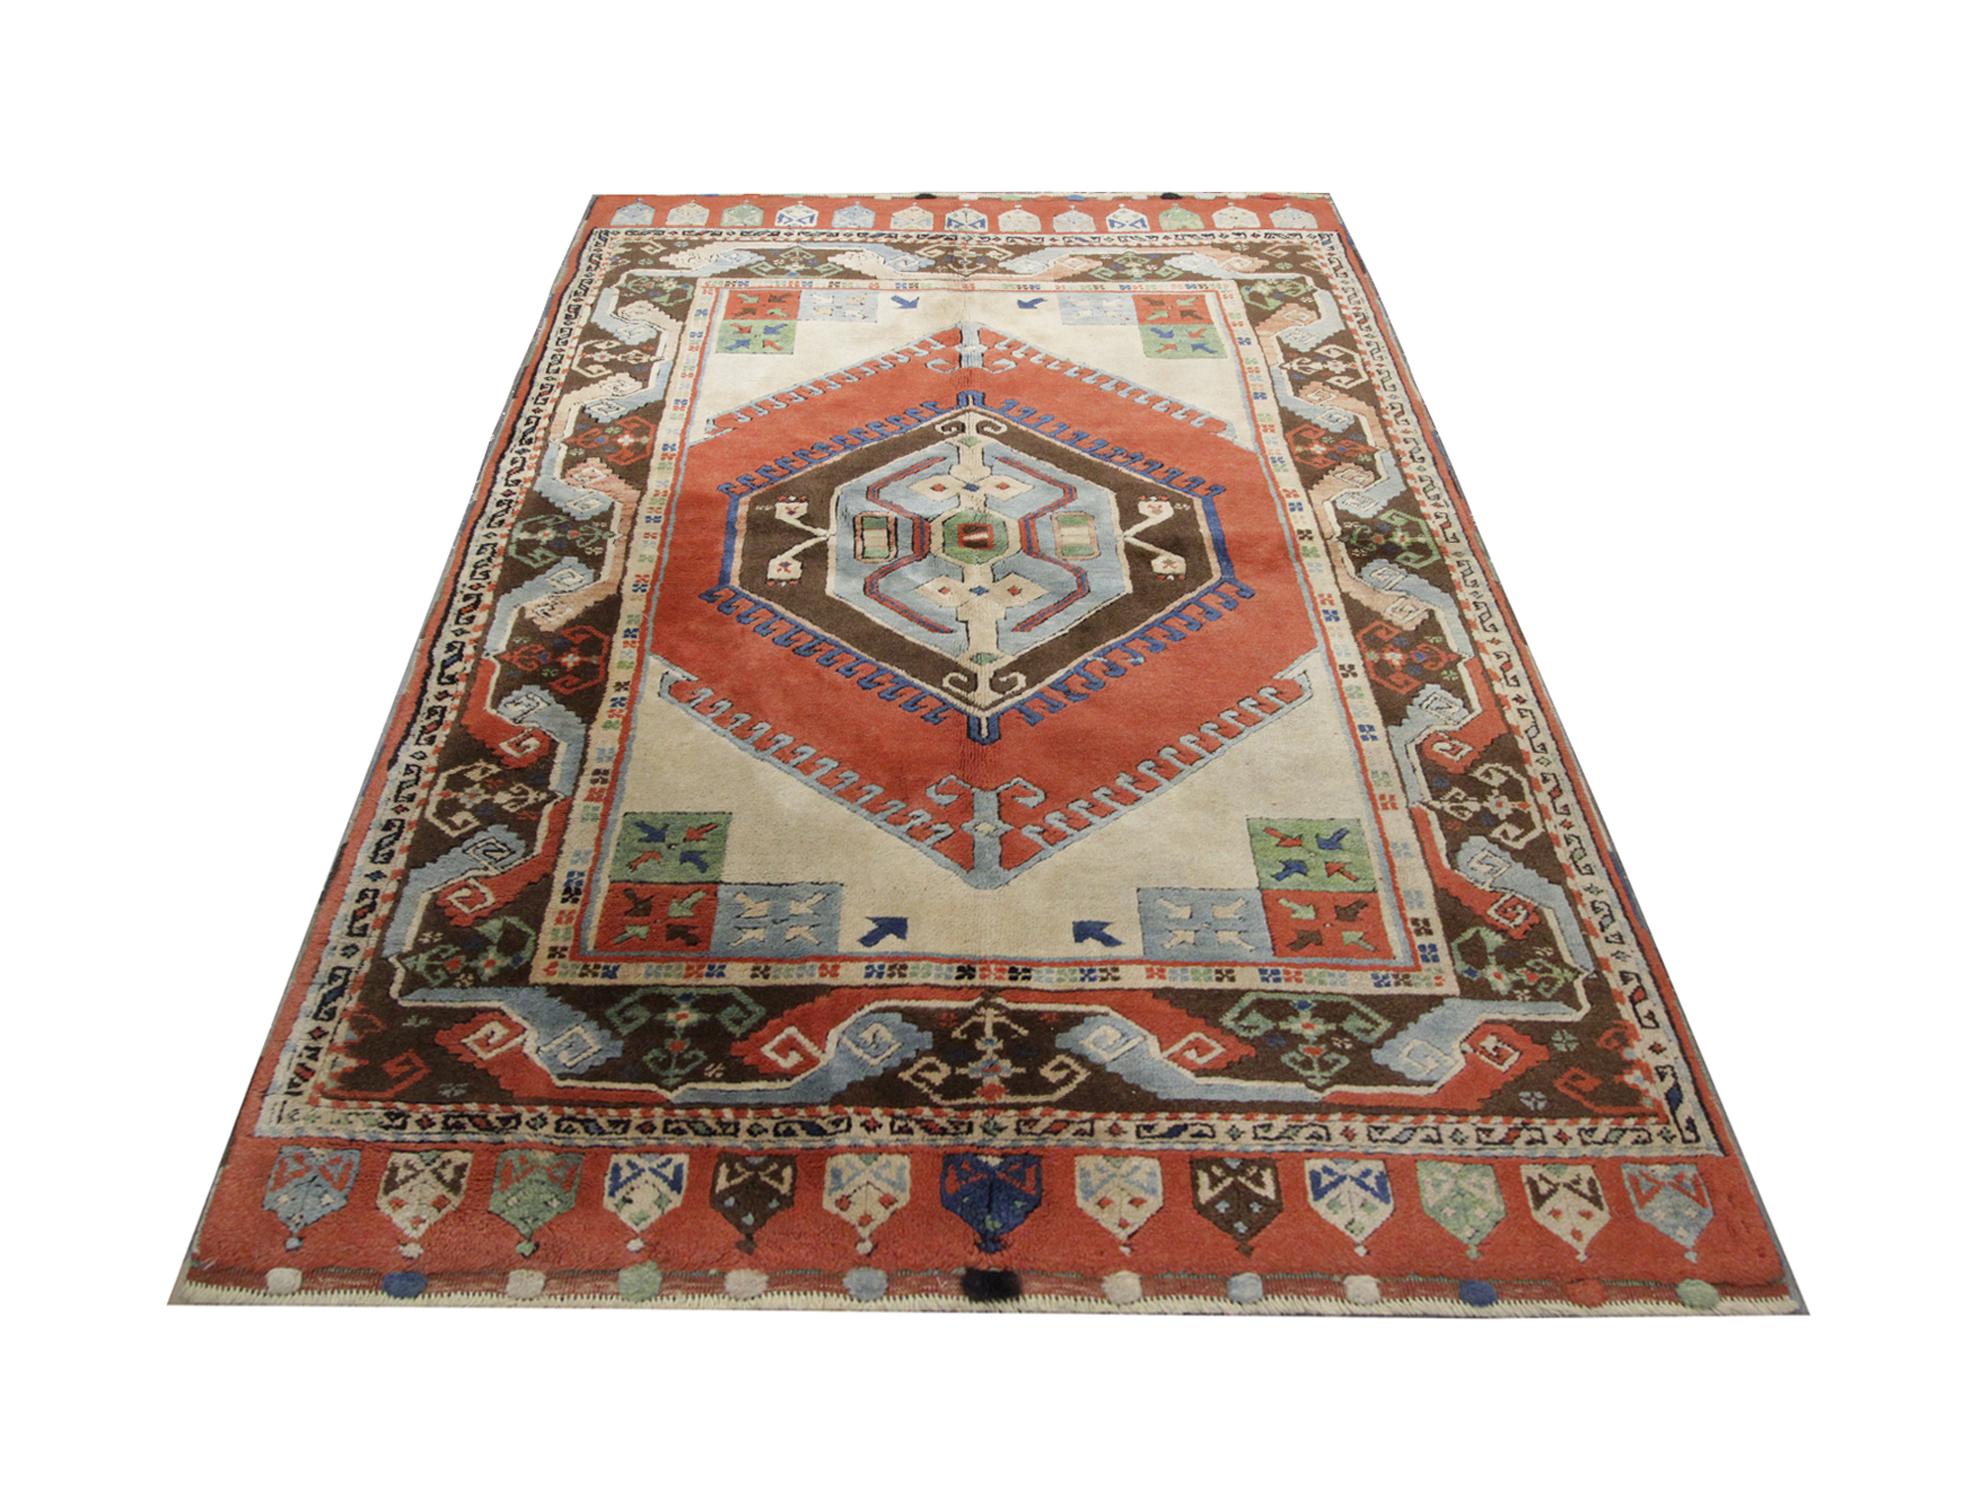 This antique Turkish rug from Milas area and was handwoven with tribal and geometric symbols in circa 1930. The design features a large multicolored motif as the central medallion on a burnt orange diamond shape background. The captivating border